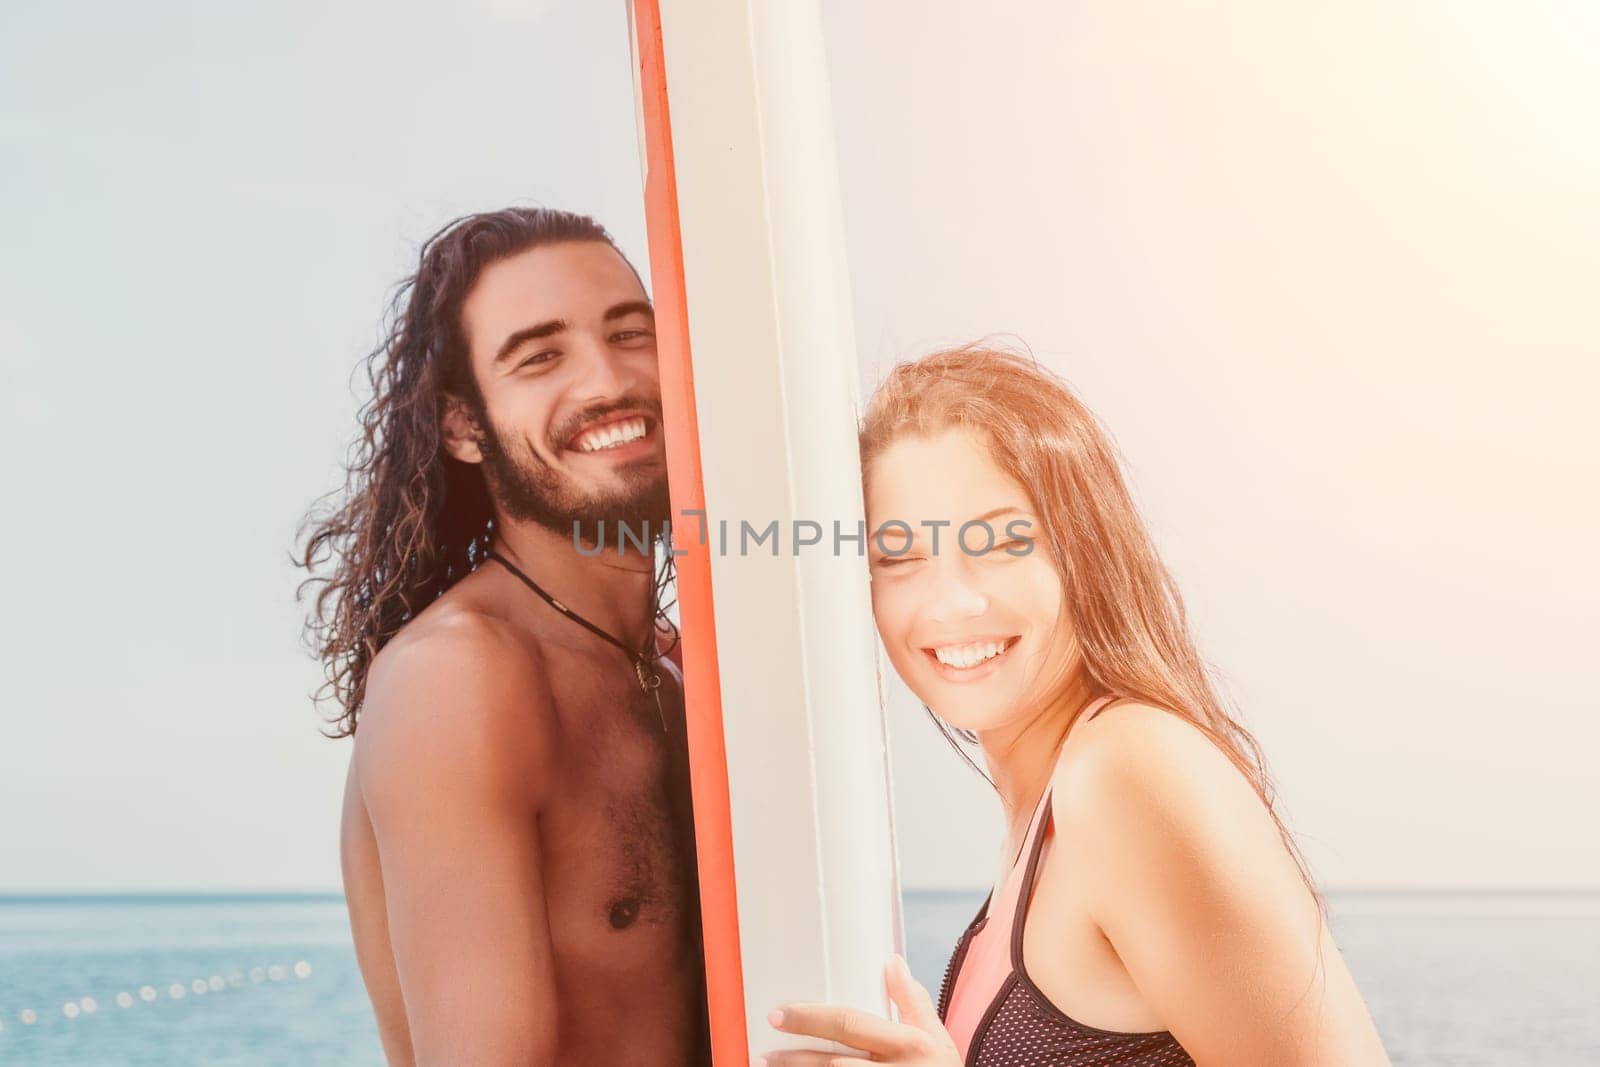 Woman man sea sup. Close up portrait of beautiful young caucasian woman with black hair and freckles looking at camera and smiling. Cute woman portrait in a pink bikini posing on sup board in the sea by panophotograph